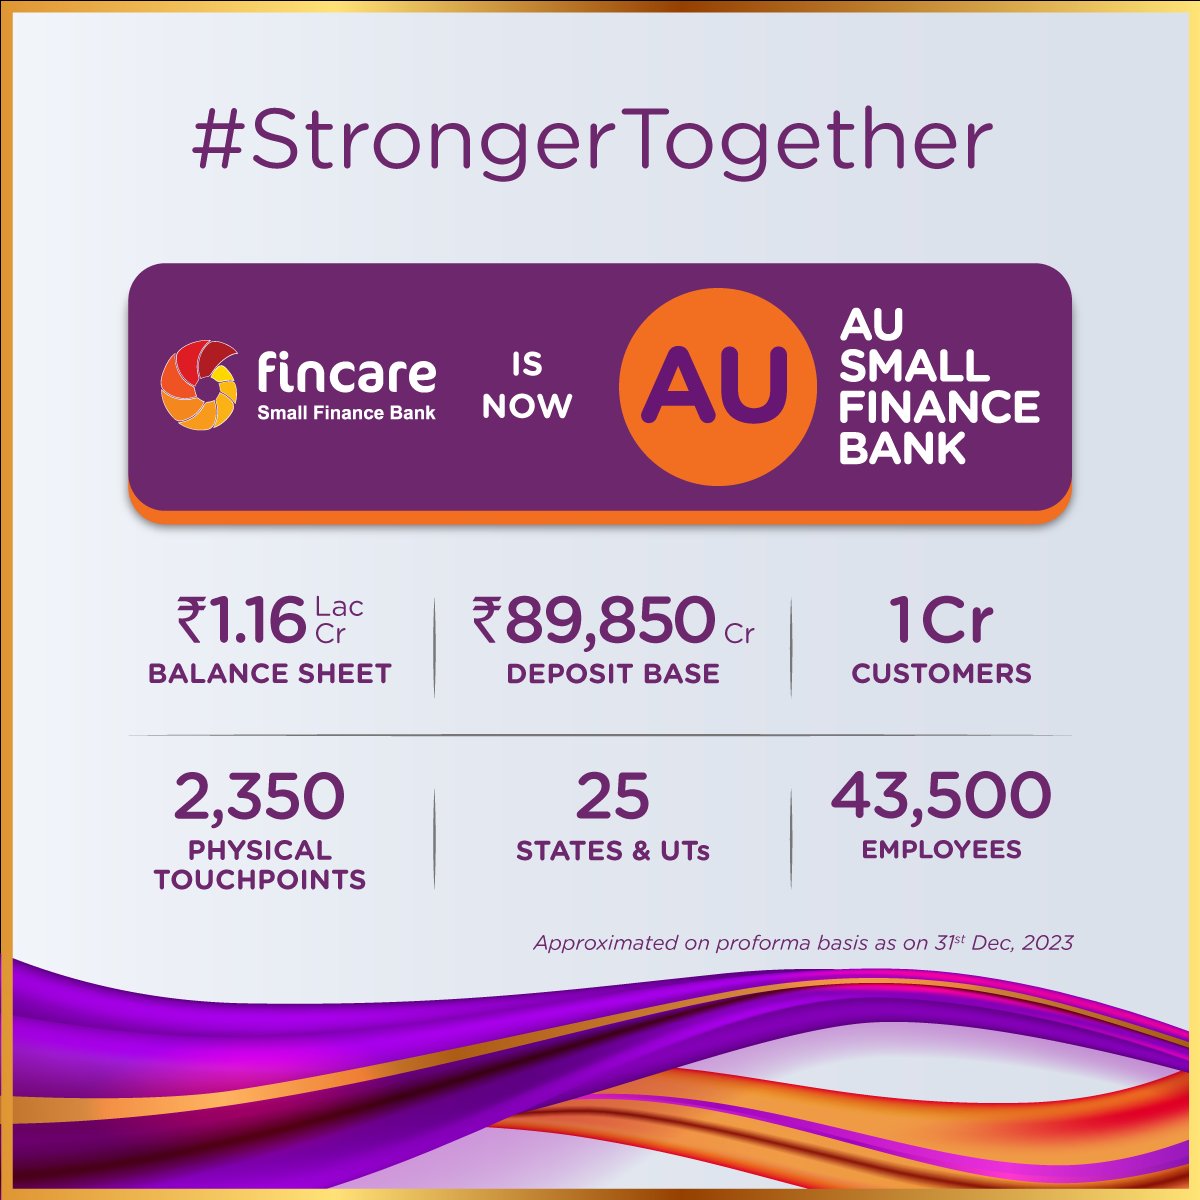 We are thrilled to announce that w.e.f. April 1, 2024, @FincareBank is @aubankindia. This merger makes us a robust pan-India banking franchise, by leveraging our complementary geographic reach and product offerings. We warmly welcome Fincare customers into our family today, with…